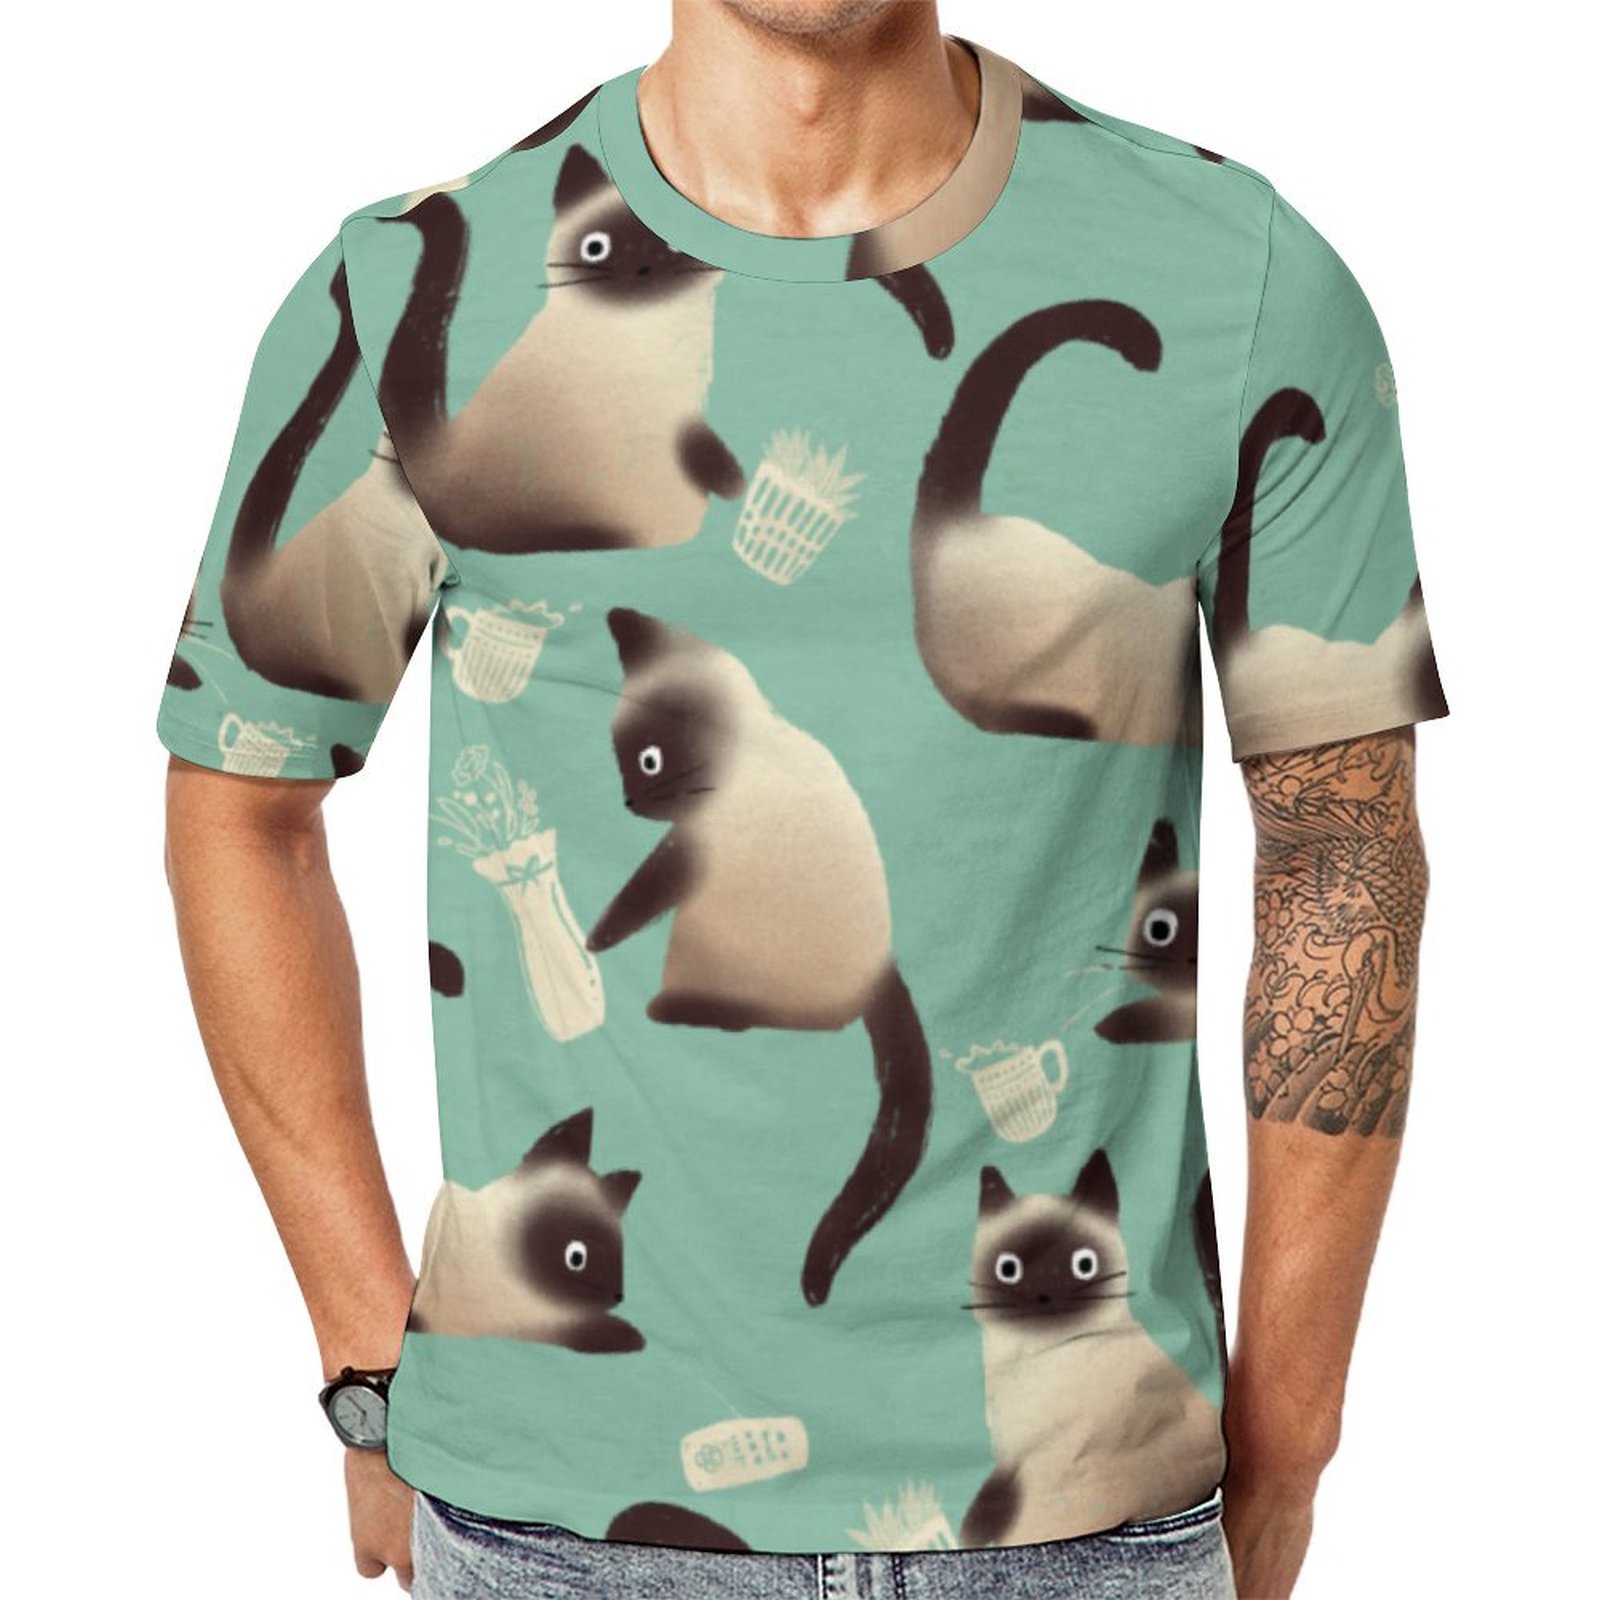 Bad Siamese Cats Knocking Stuff Over Short Sleeve Print Unisex Tshirt Summer Casual Tees for Men and Women Coolcoshirts